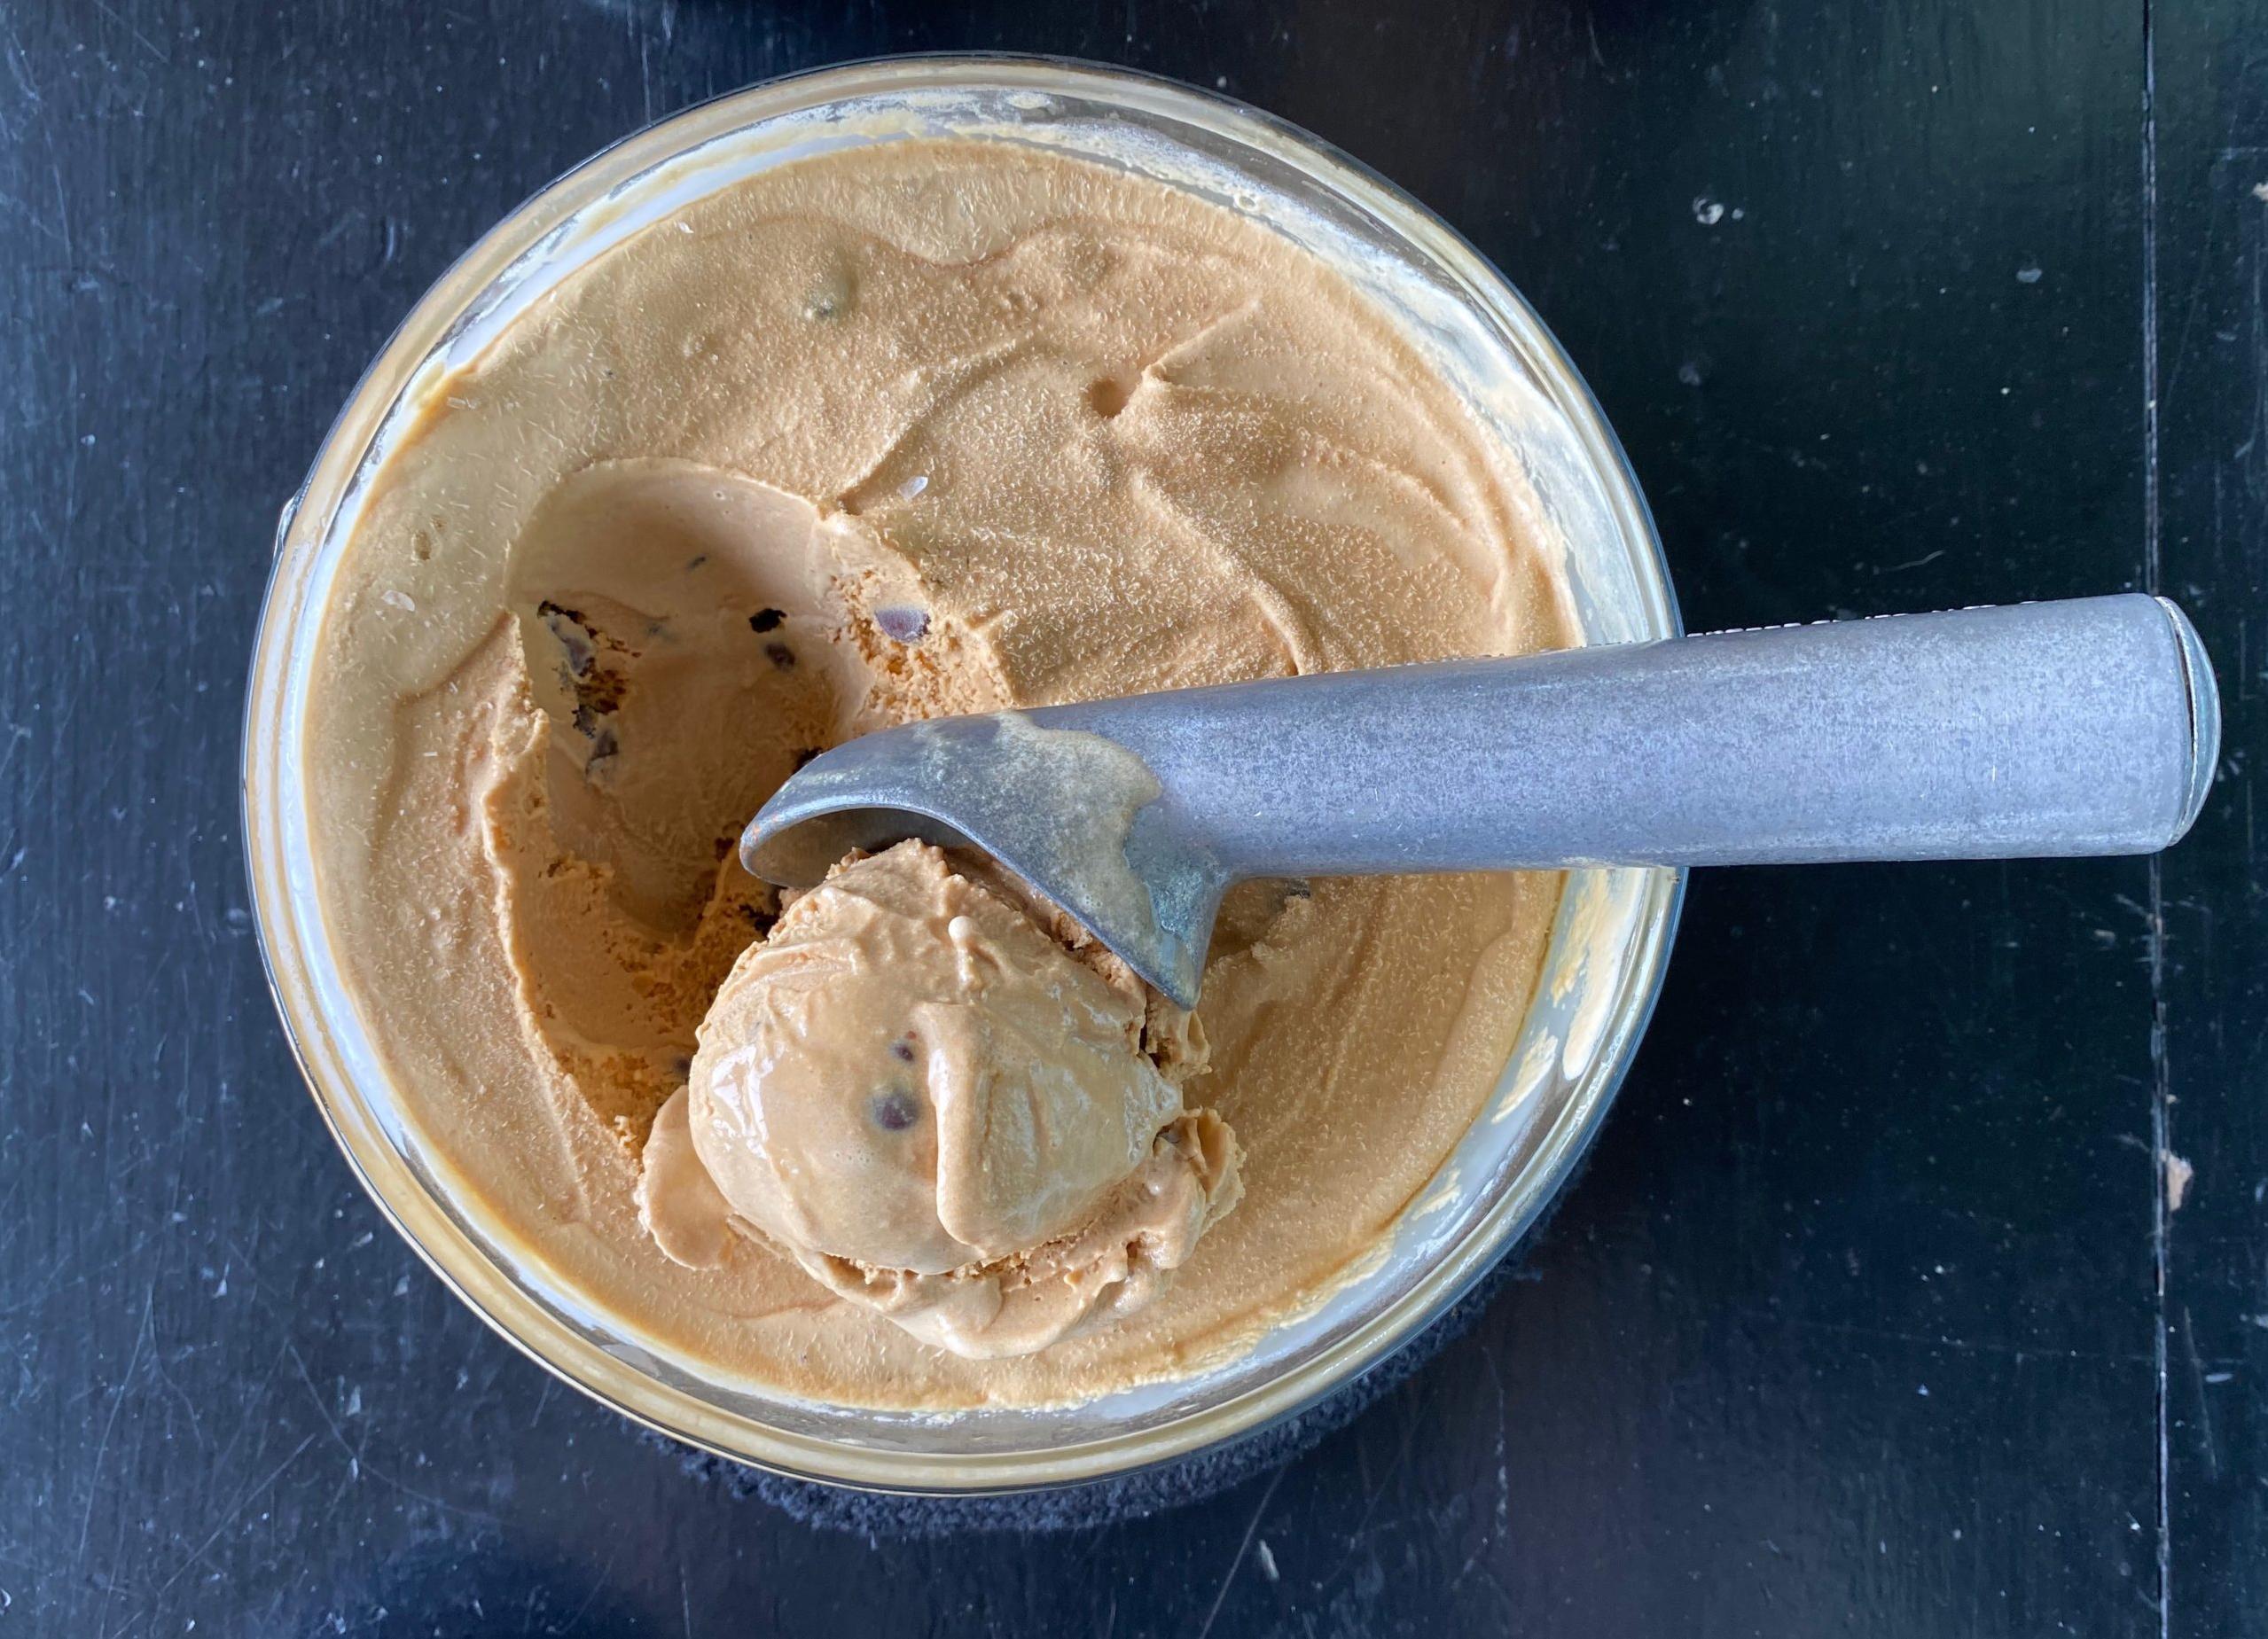  When coffee meets ice cream, it's a match made in heaven!